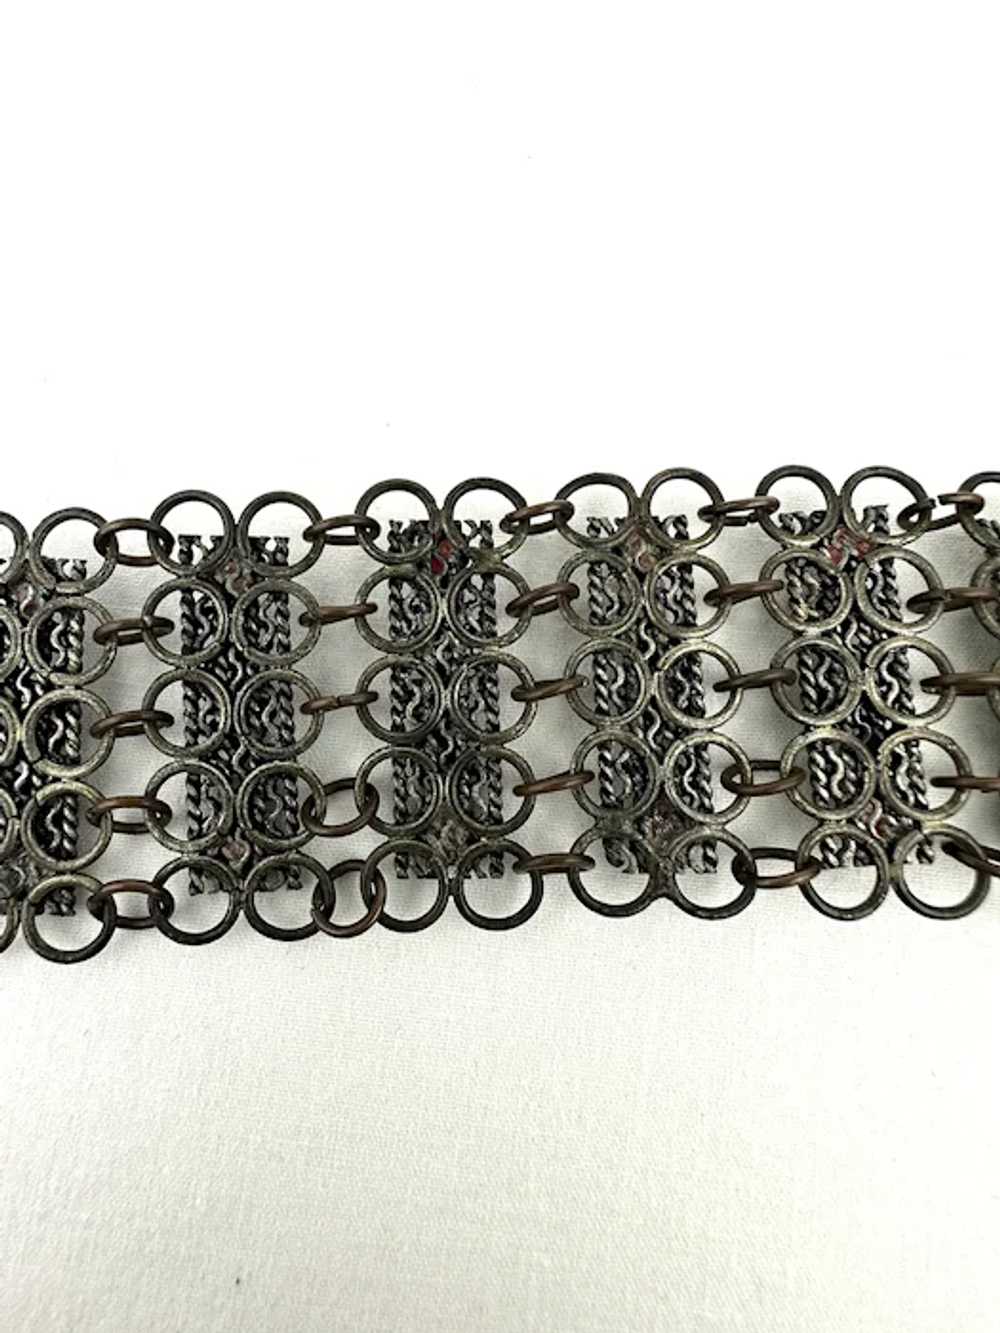 Art Deco Chain Mail and Coral Glass Cuff Bracelet - image 7